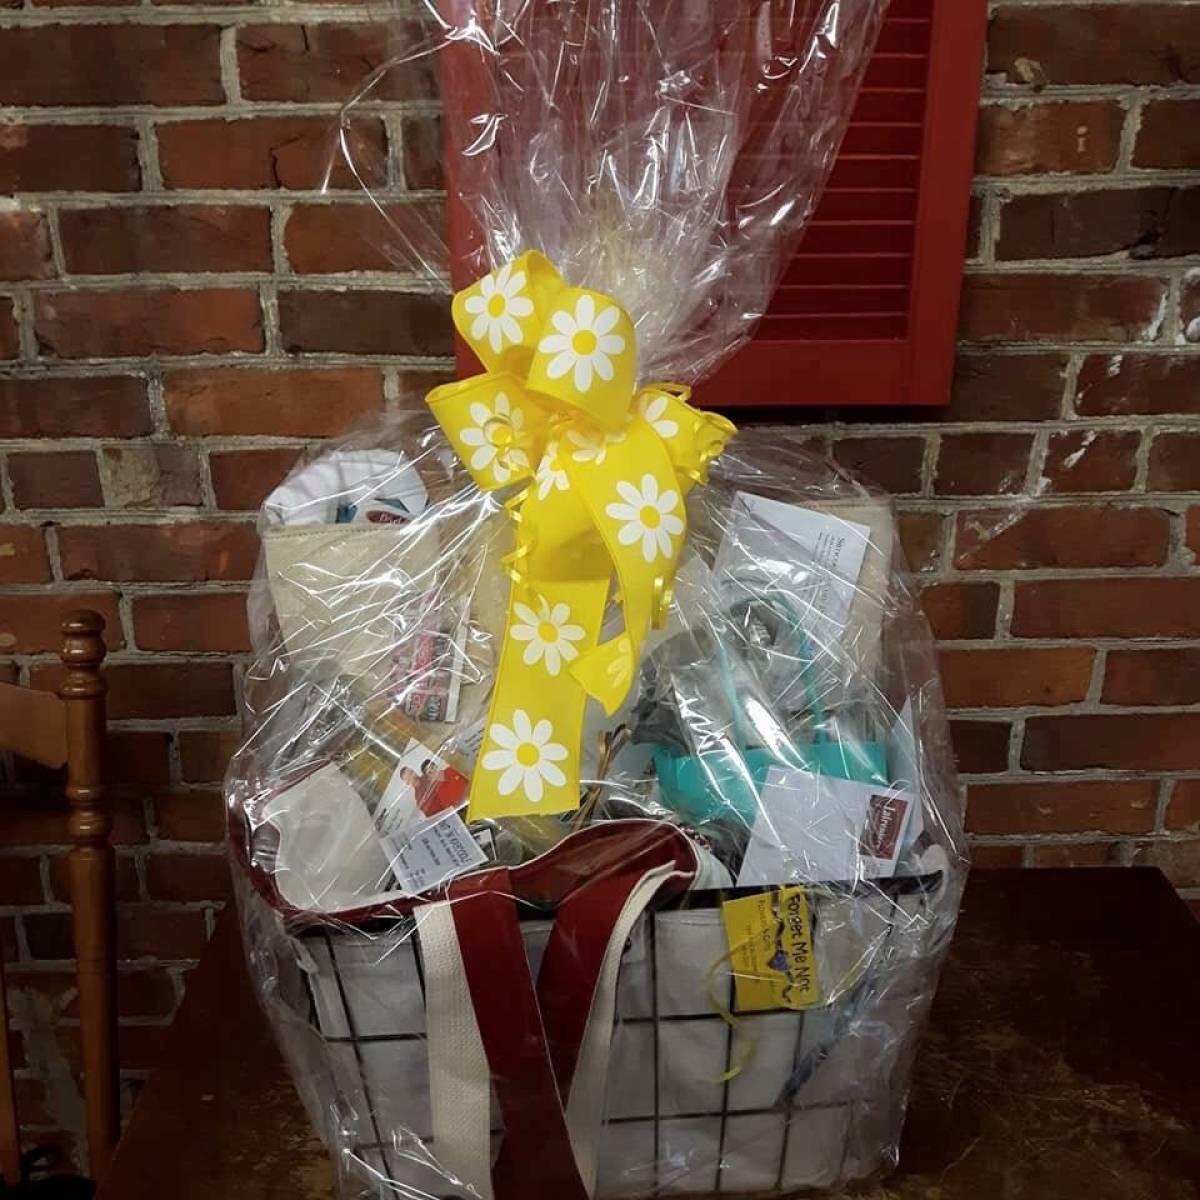 2018 CHAMBER MOTHER'S DAY BASKET